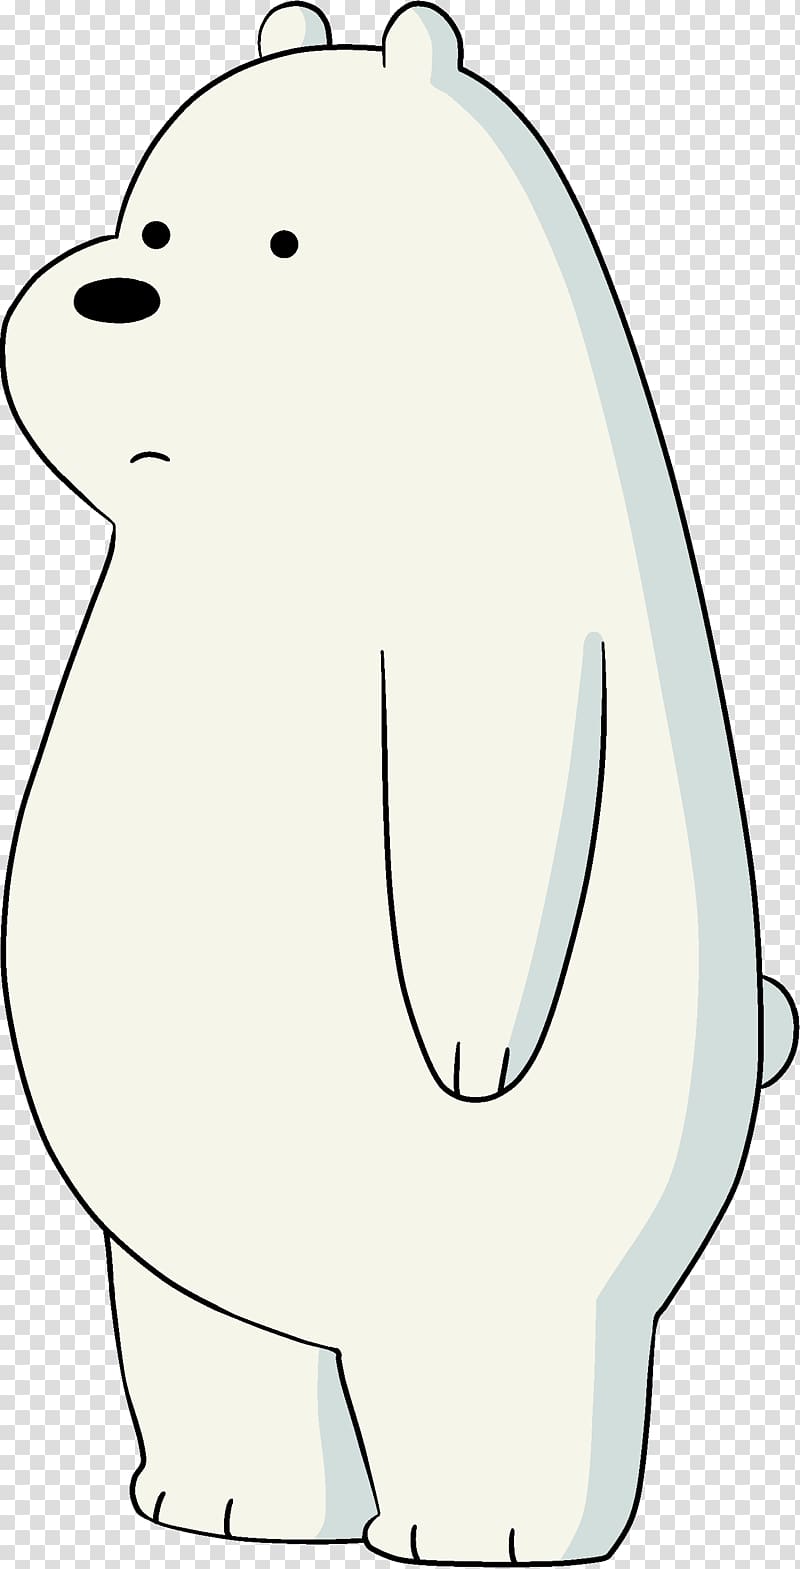 We Bare Bears: Over 301 Royalty-Free Licensable Stock Illustrations &  Drawings | Shutterstock